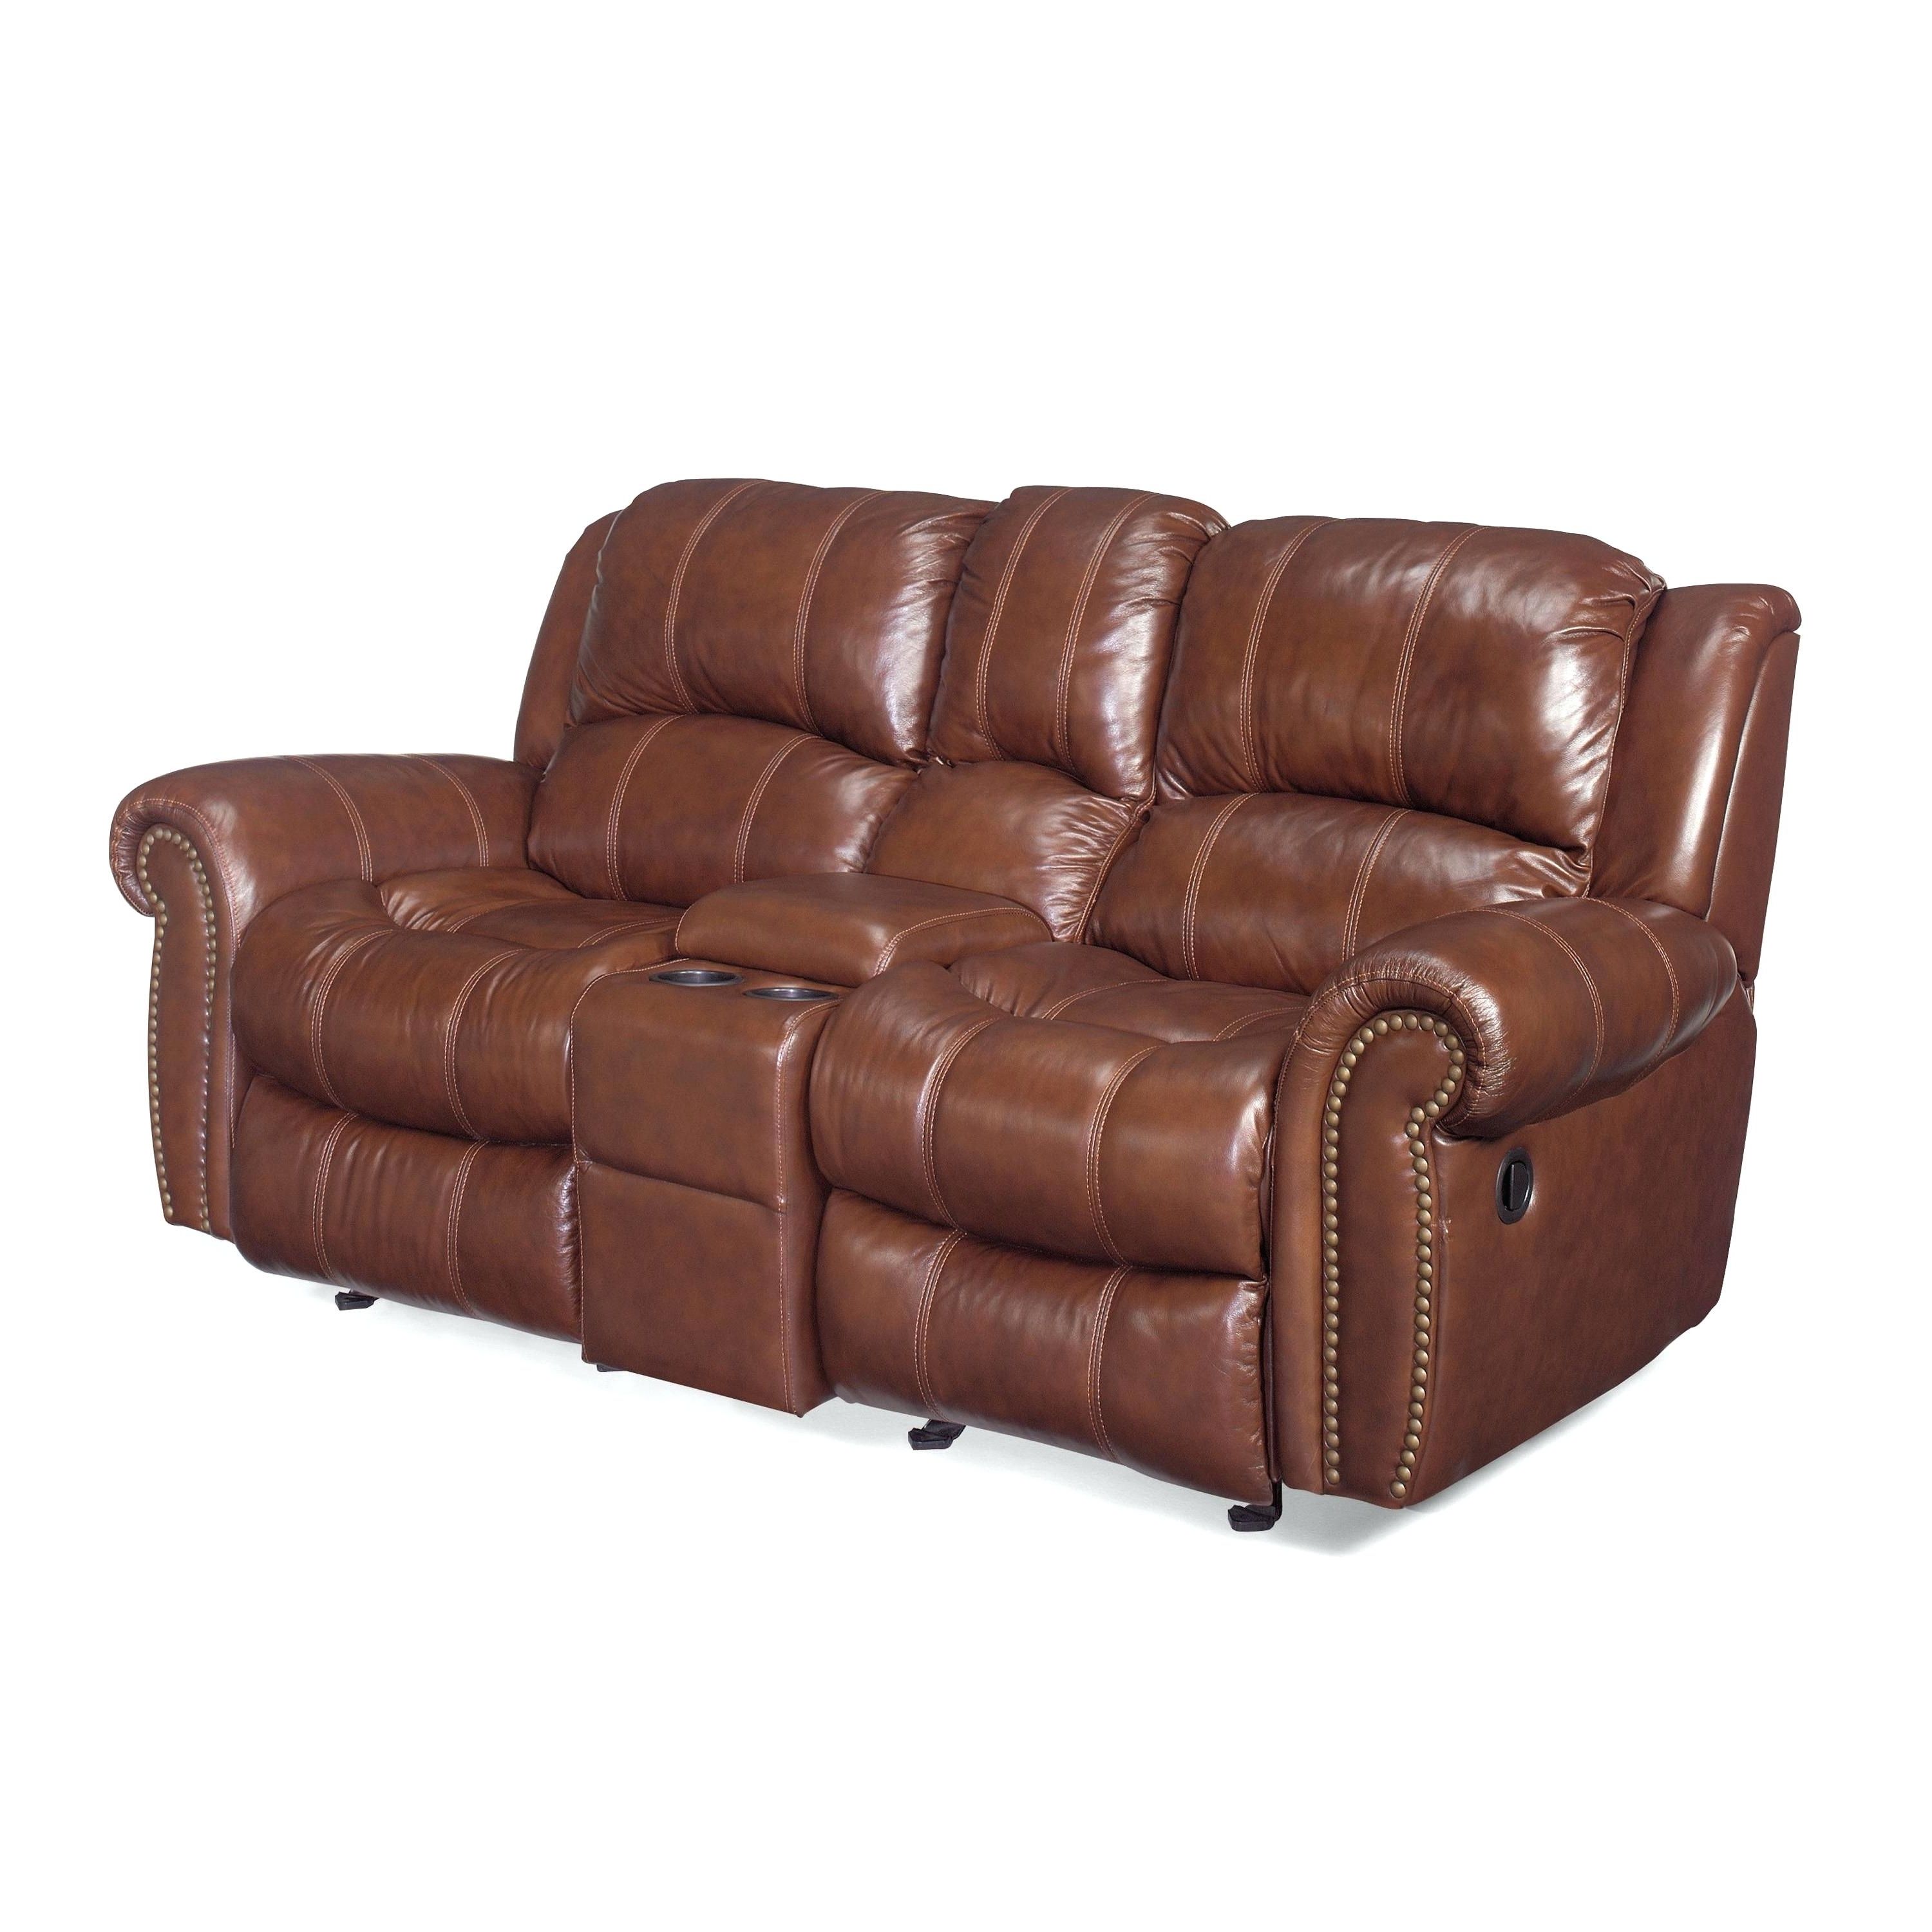 Most Recent 2 Seater Recliner Leather Sofas With Alessia Leather Sofa Brown • Leather Sofa (View 12 of 20)